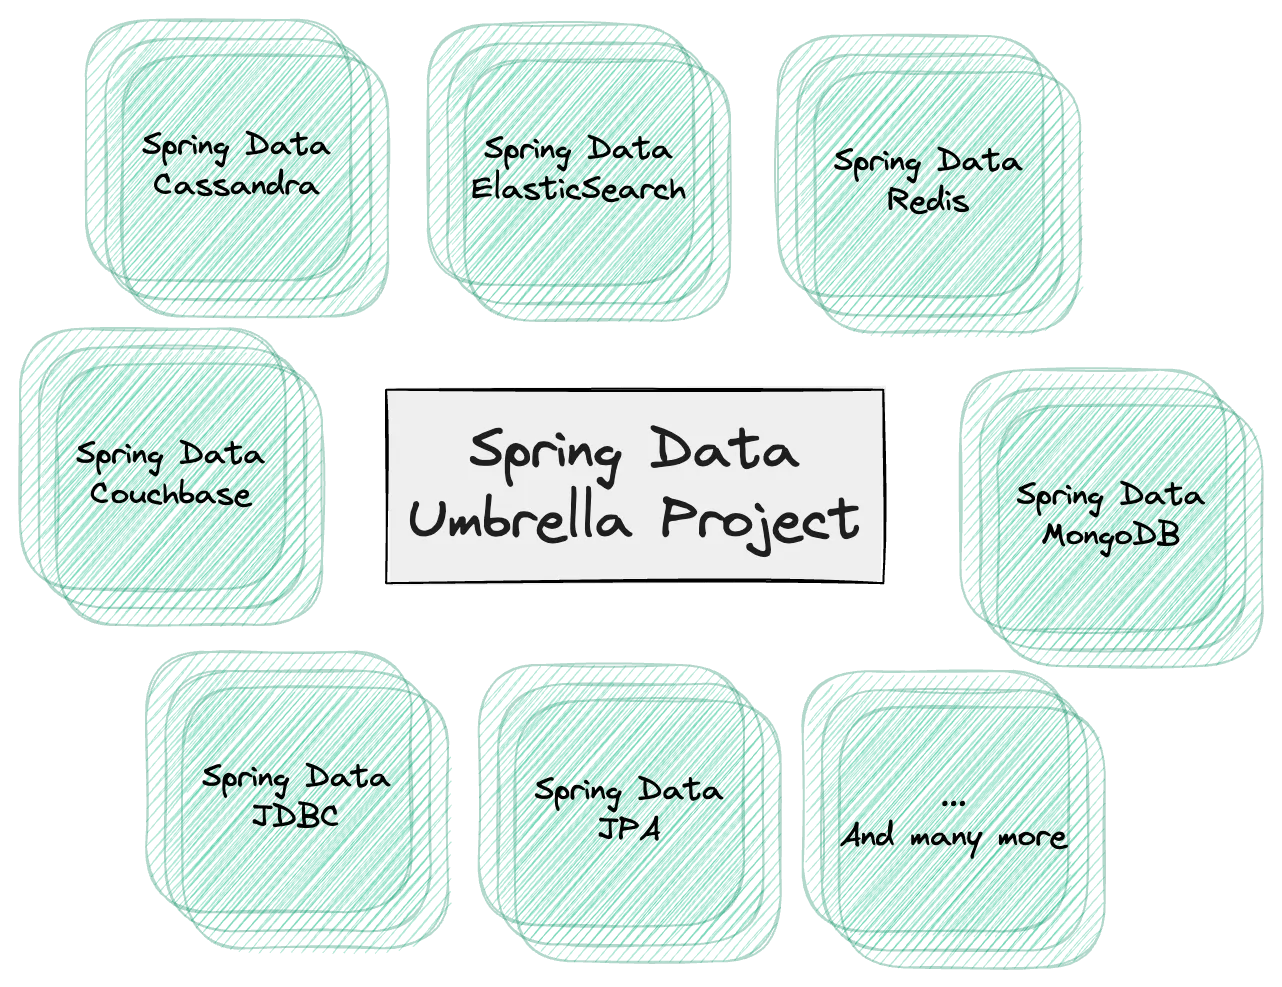 Image showing the subprojects "Spring Data Cassandra", "Spring Data ElasticSearch", "Spring Data Redis", "Spring Data Couchbase", "Spring Data MongoDB", "Spring Data JDBC", "Spring Data JPA" and many more.